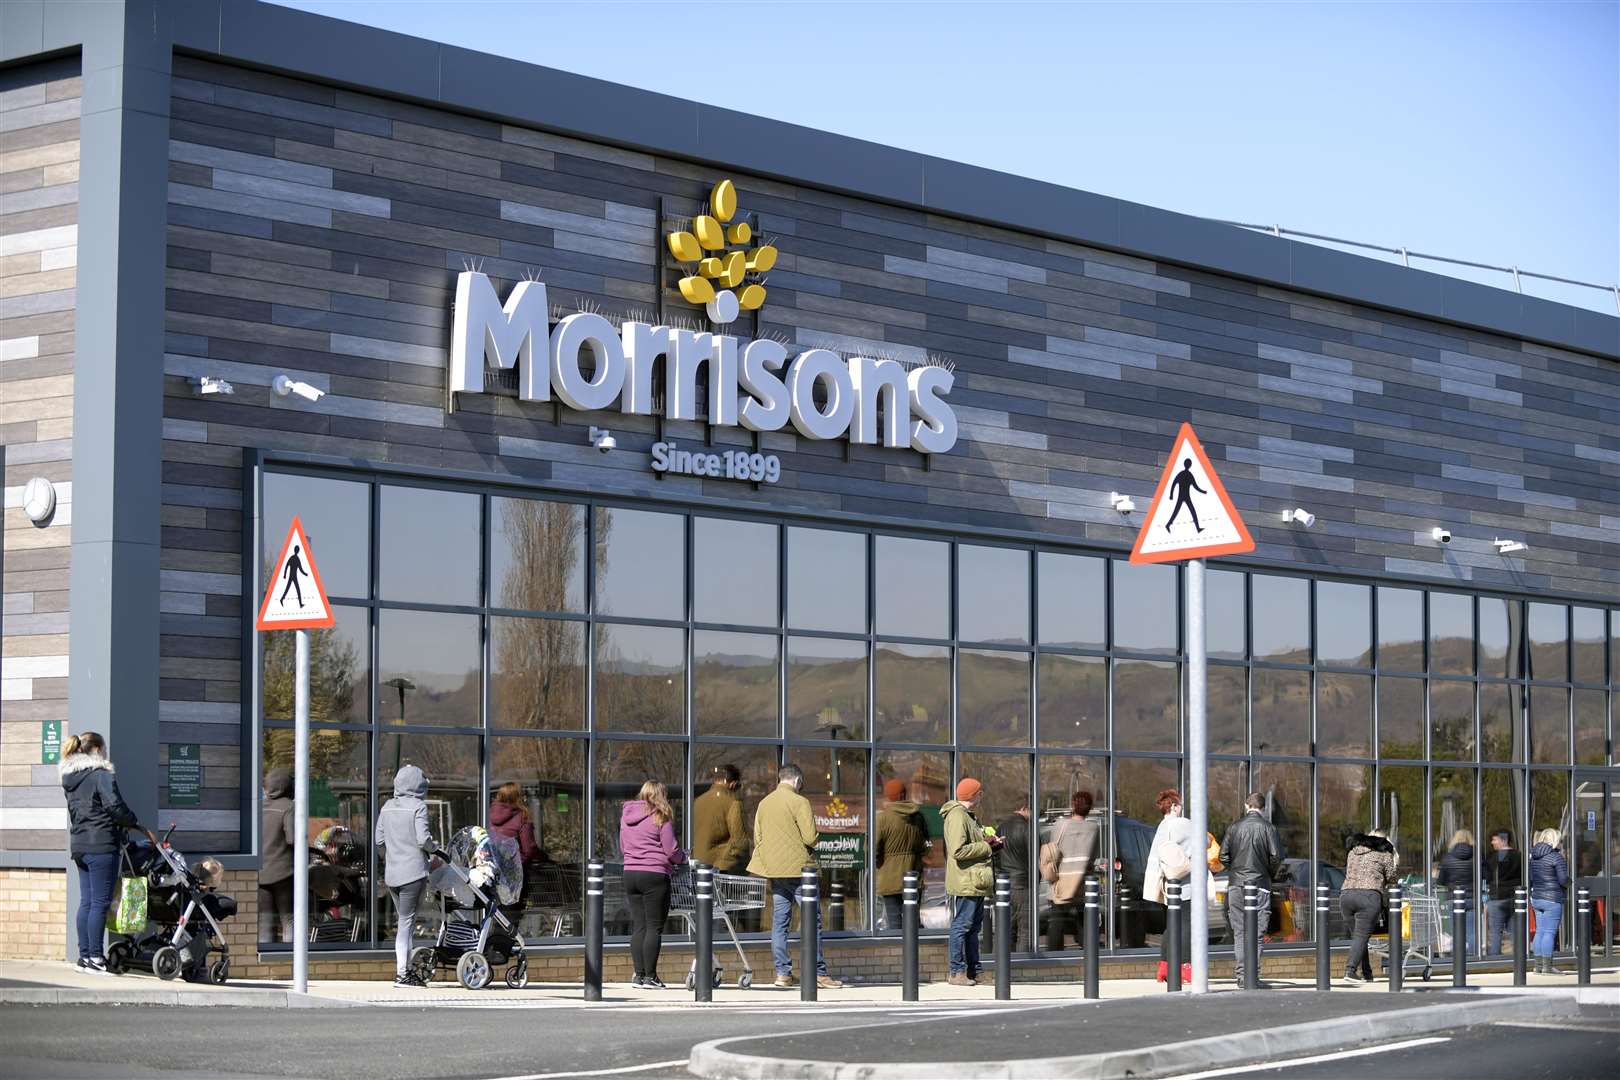 Morrisons stores are now handing out free sanitary products to customers in need